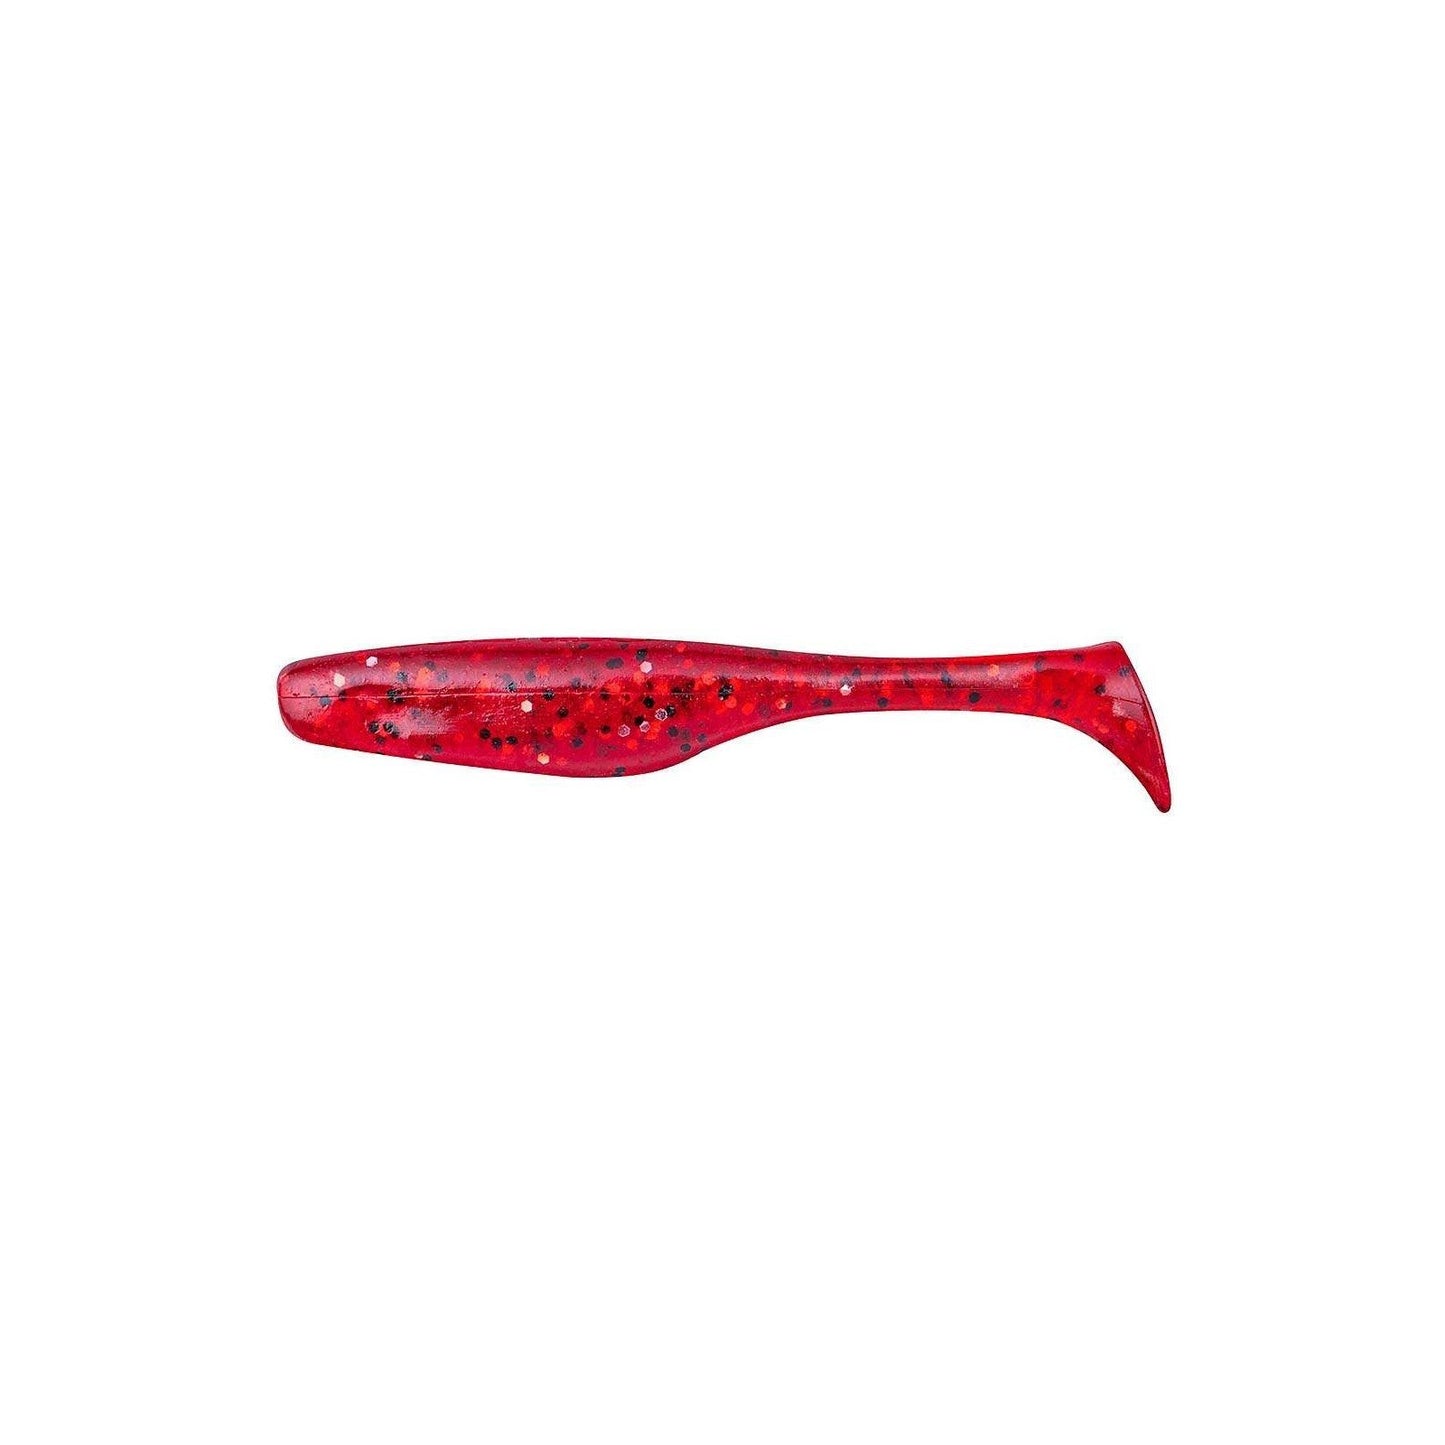 Select Fishing Crazy Shad Gummifisch 027